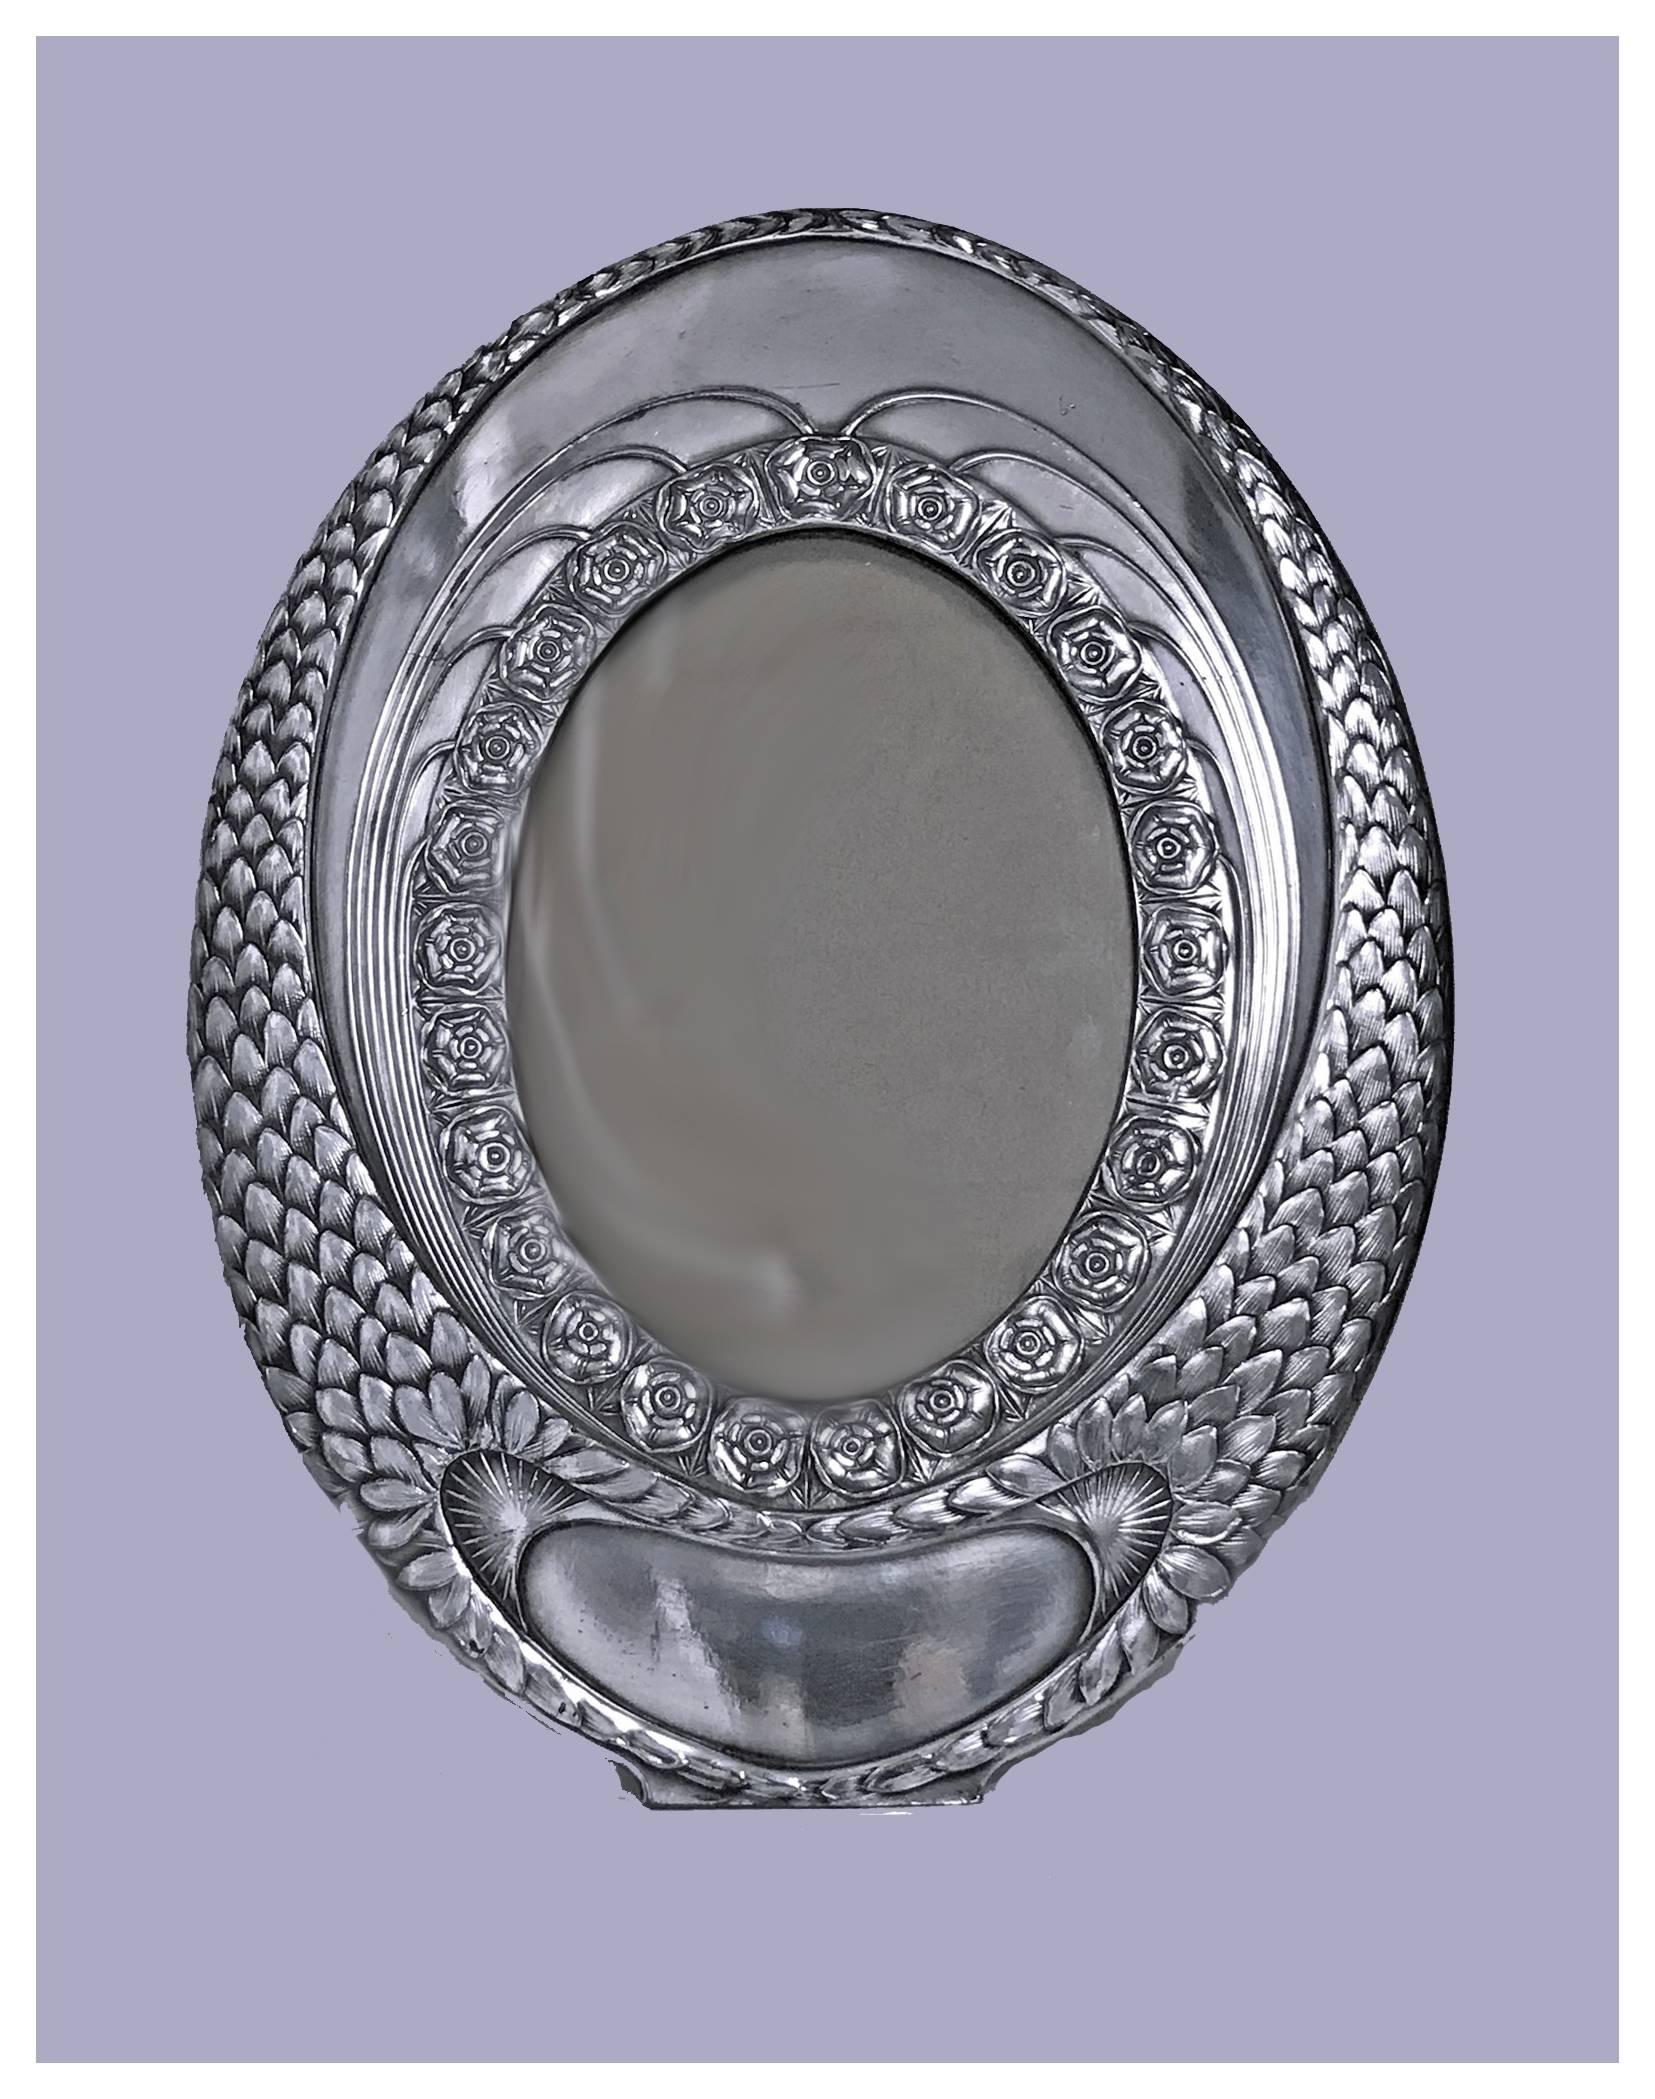 W.M.F Art Nouveau Silver Plate Frame, Germany C.1910. The Frame of large oval shape, decorated with stylised plumage and rosette design with vacant cartouche, centering an oval compartment for photograph. WMF marks. Original back. Measures:10 x 7.5